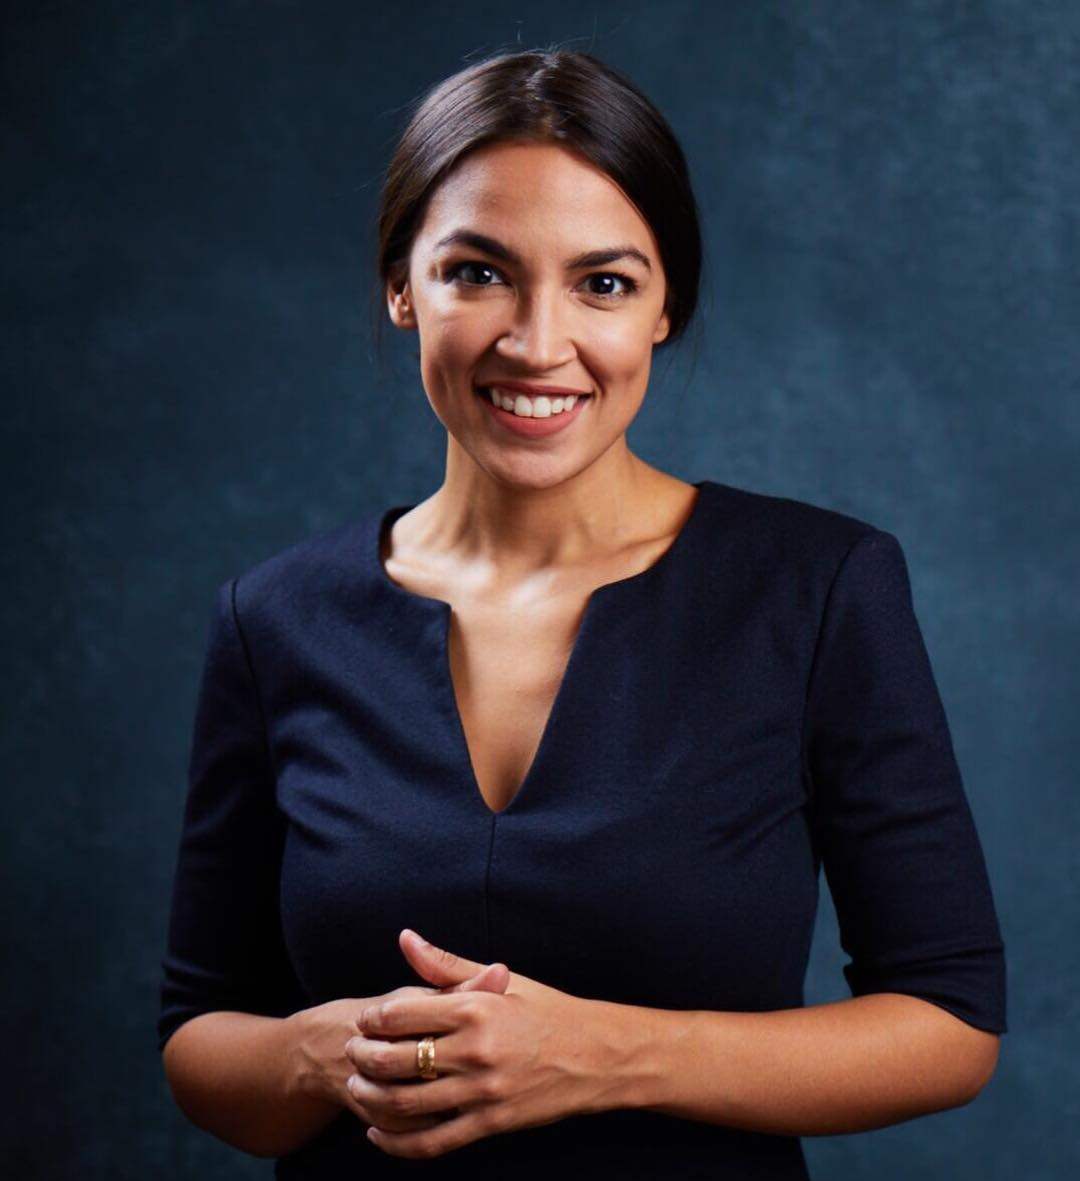 Alexandria Ocasio-Cortez is better known as AOC – and is determined to shake up Washington. Photo: @aoc/Instagram